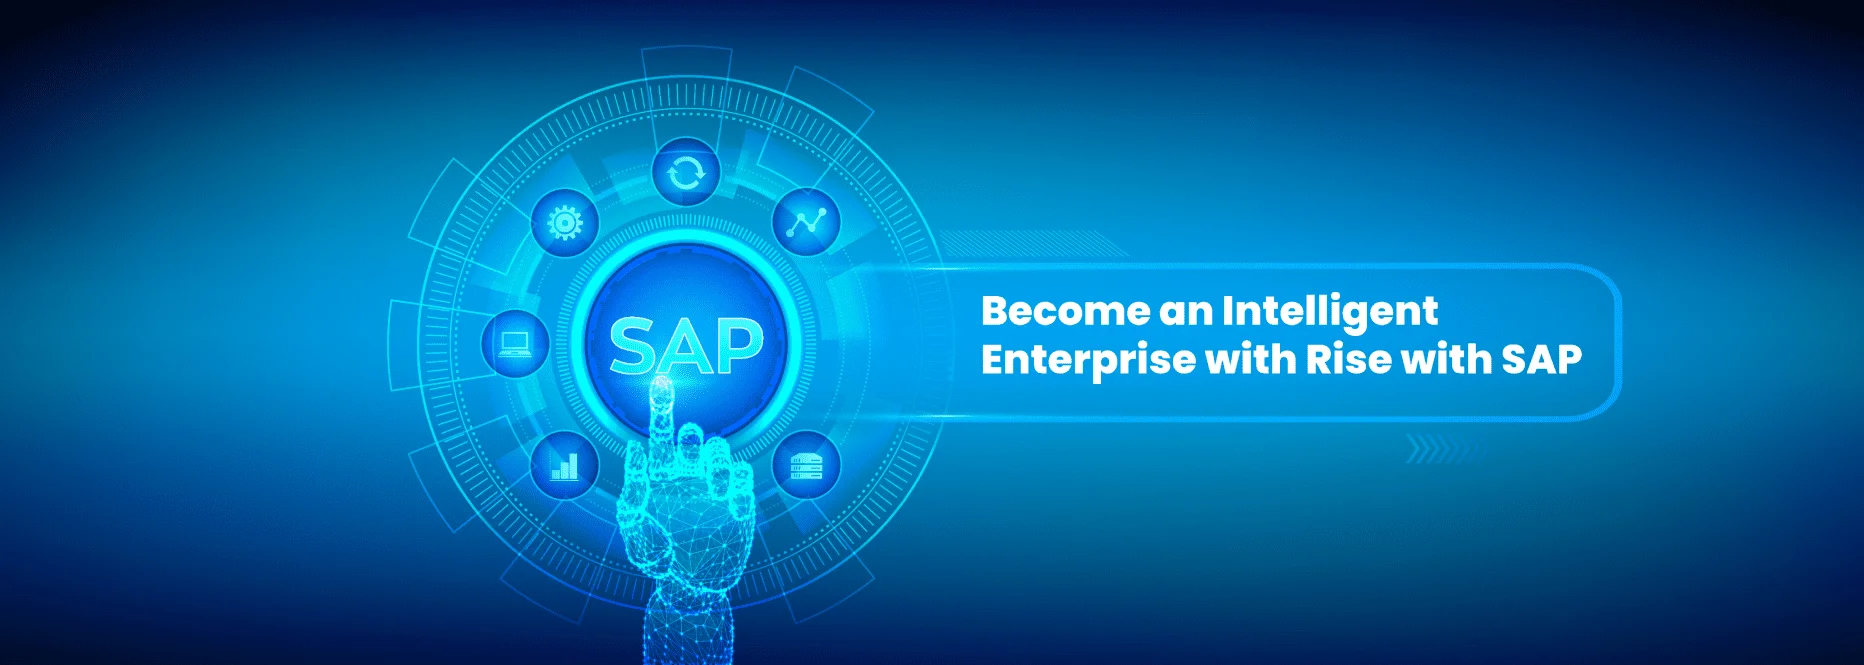 become an intelligent enterprise with rise with sap